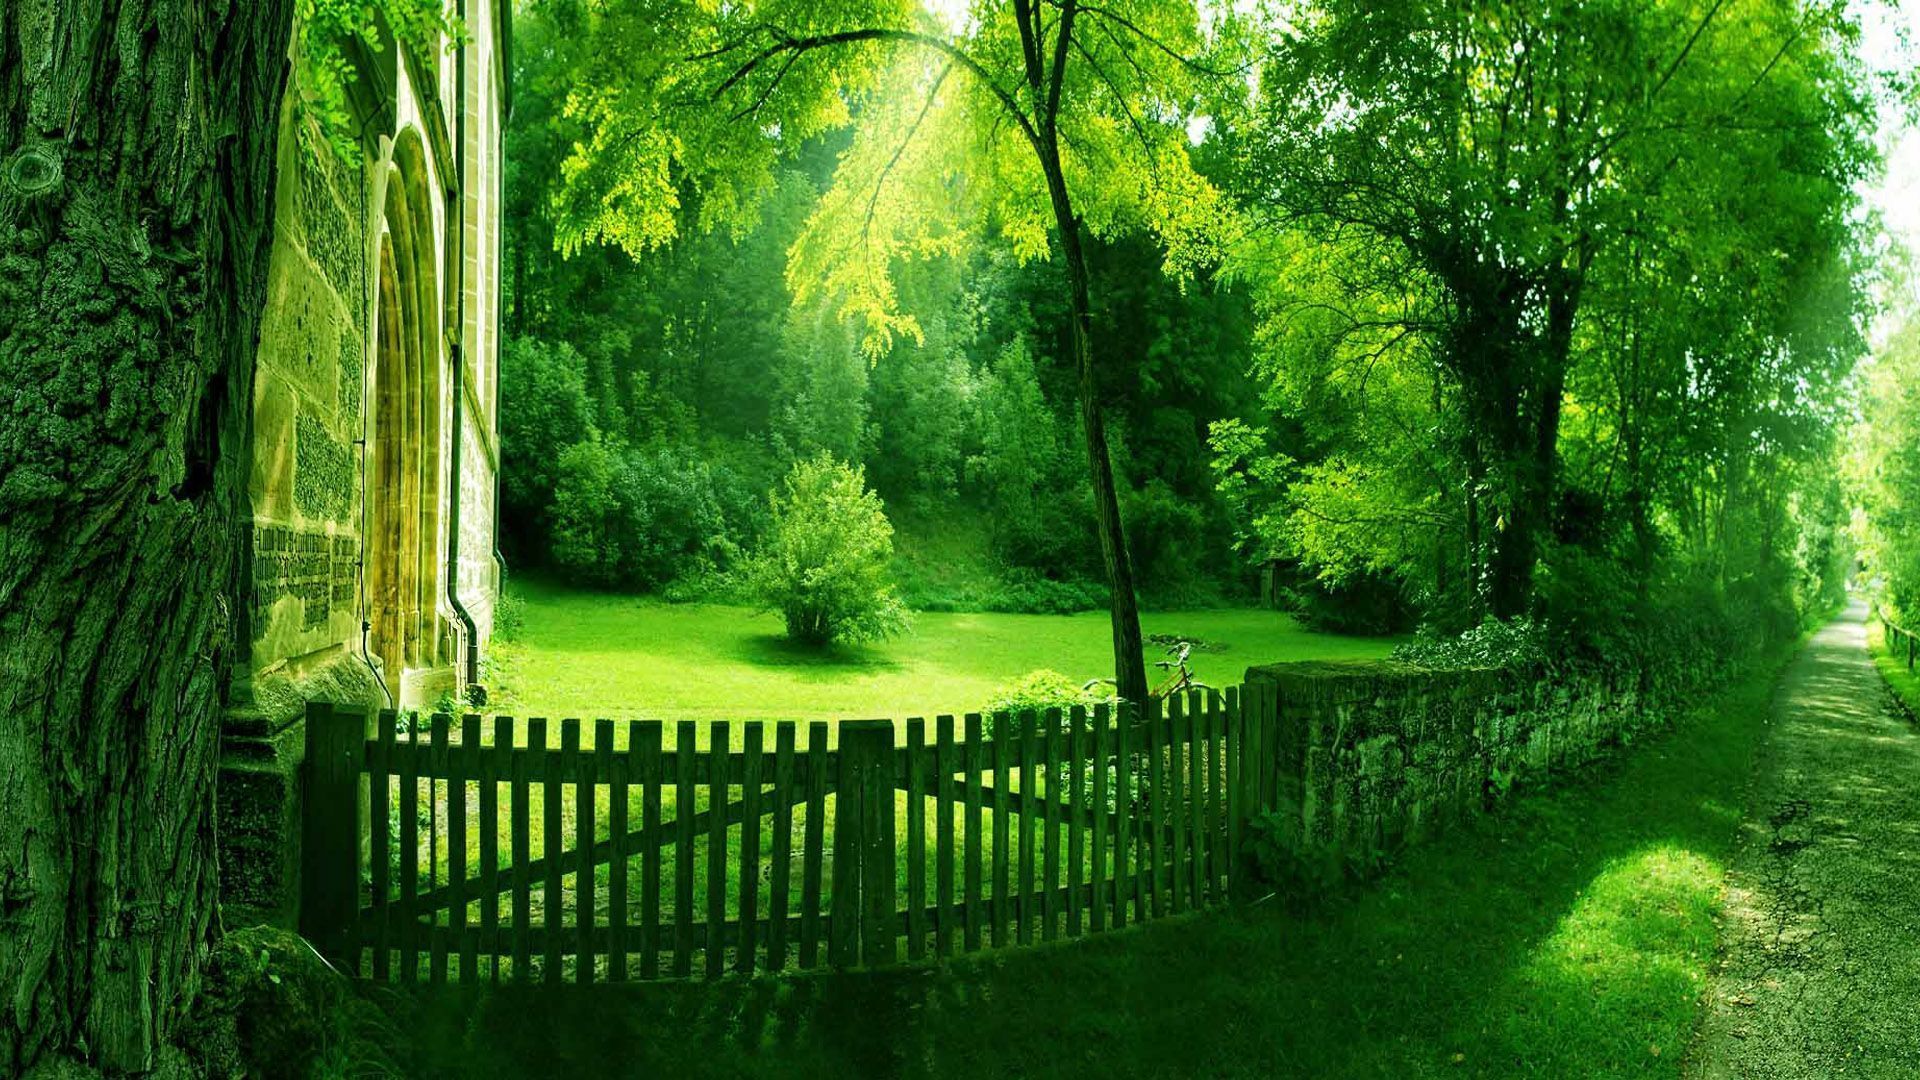 A fence and a gate in a green forest - Woods